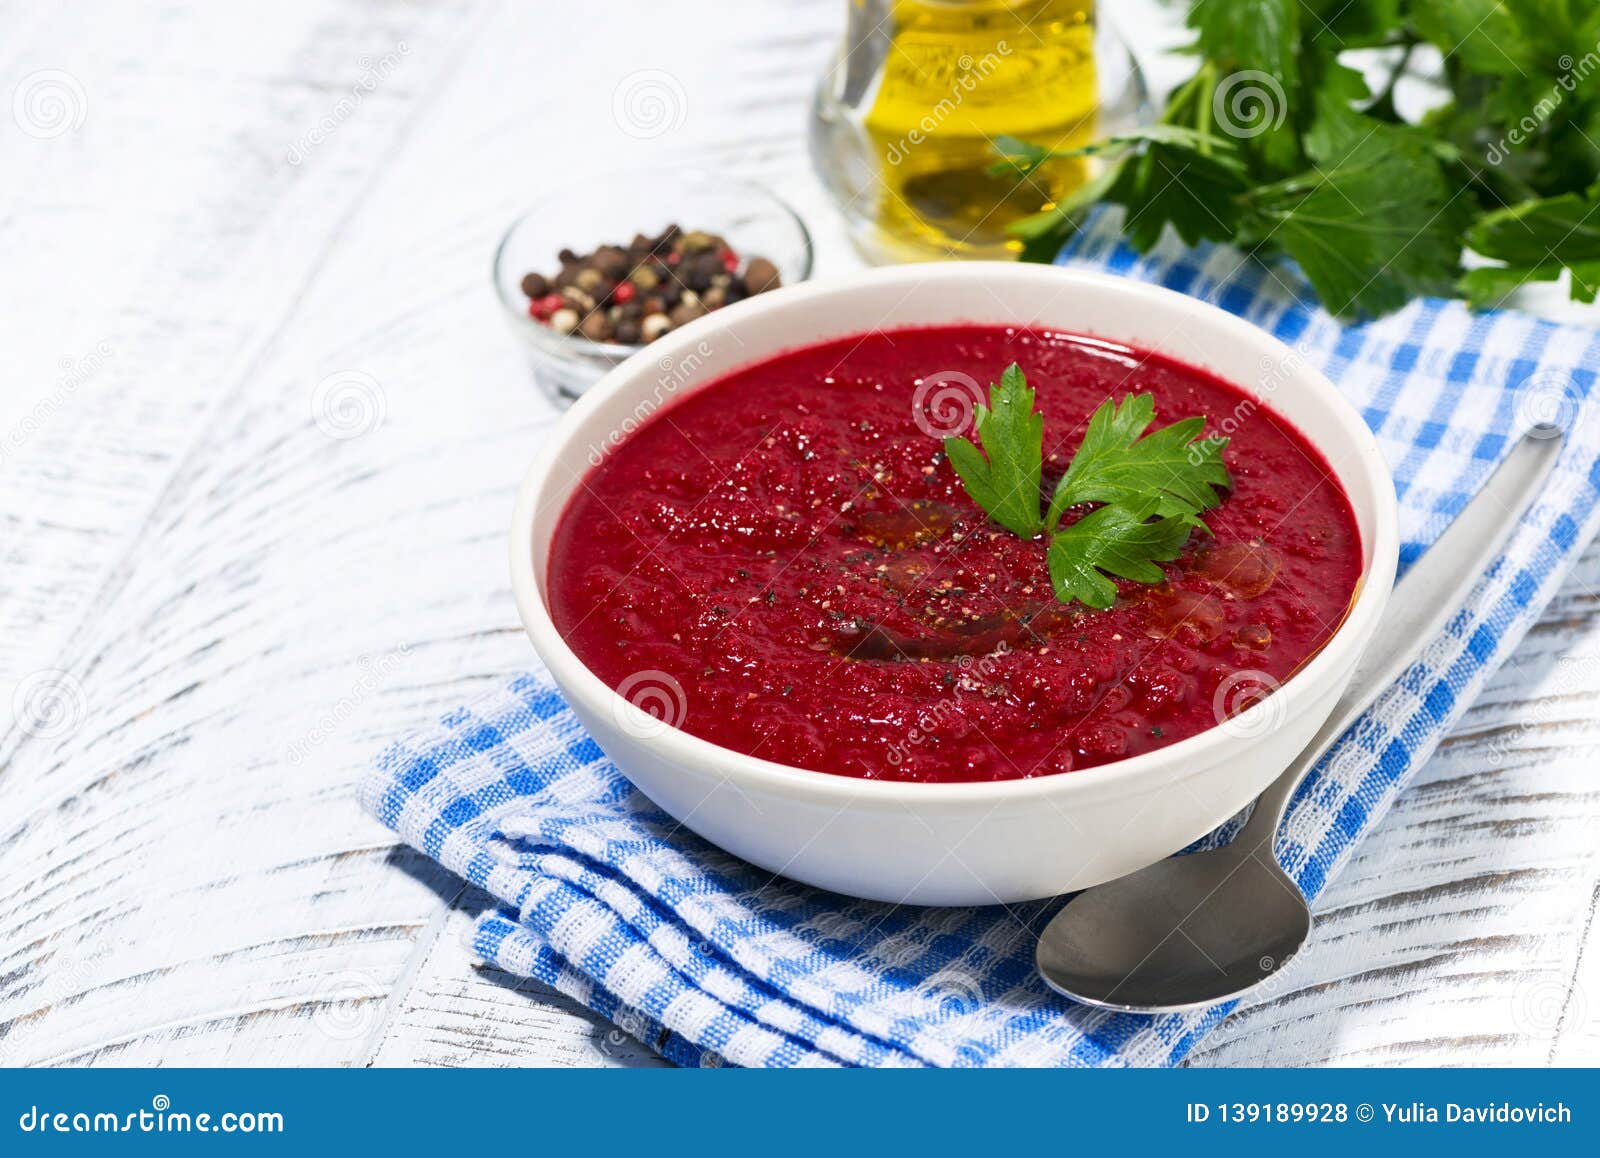 Cold Beet Soup In A Bowl On White Background Stock Photo - Image of ...